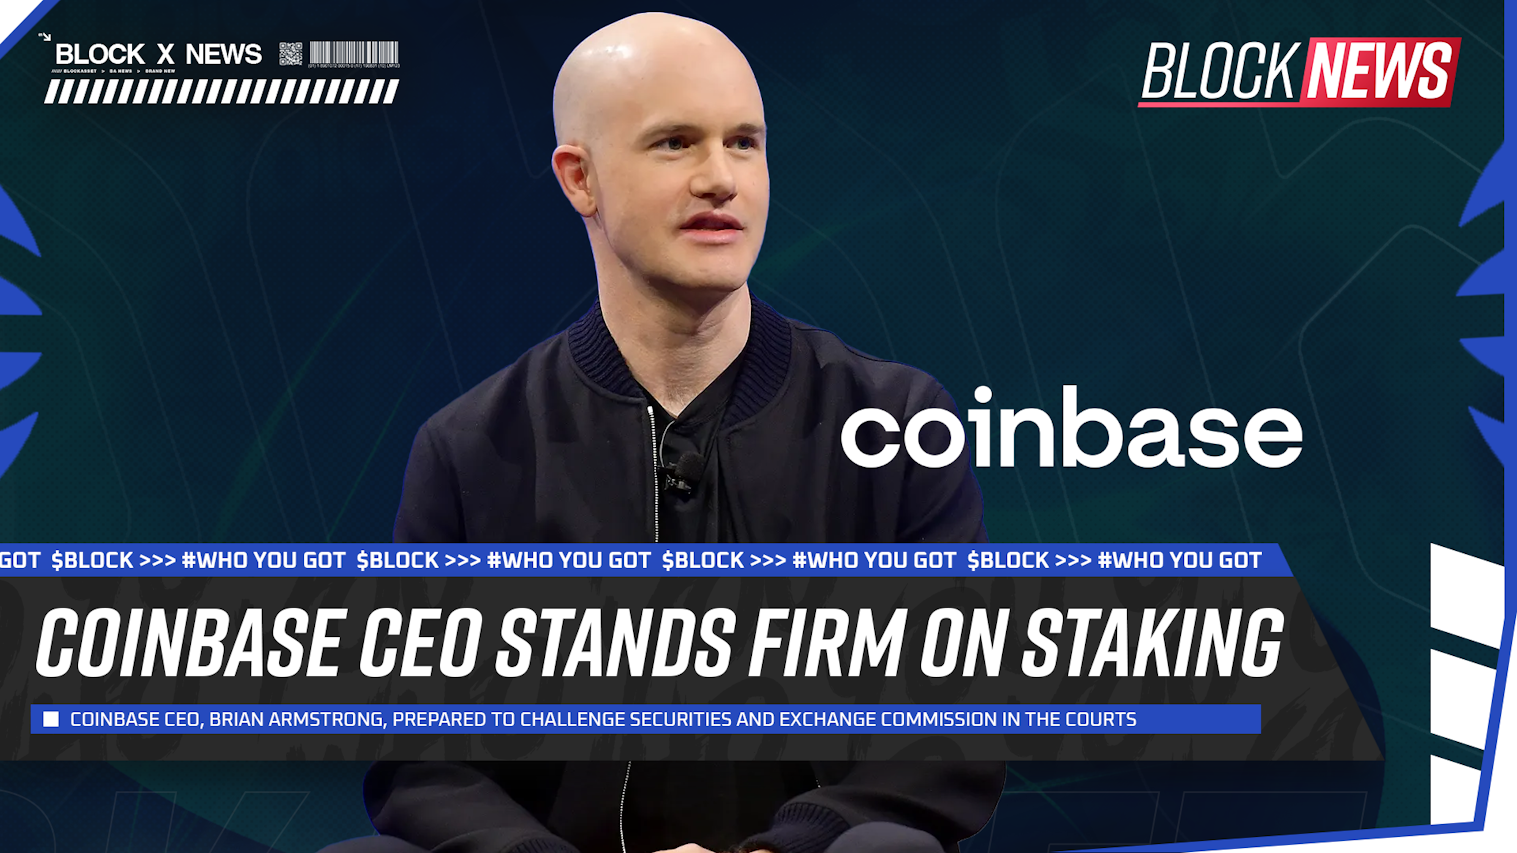 Coinbase CEO prepared to defend staking in court